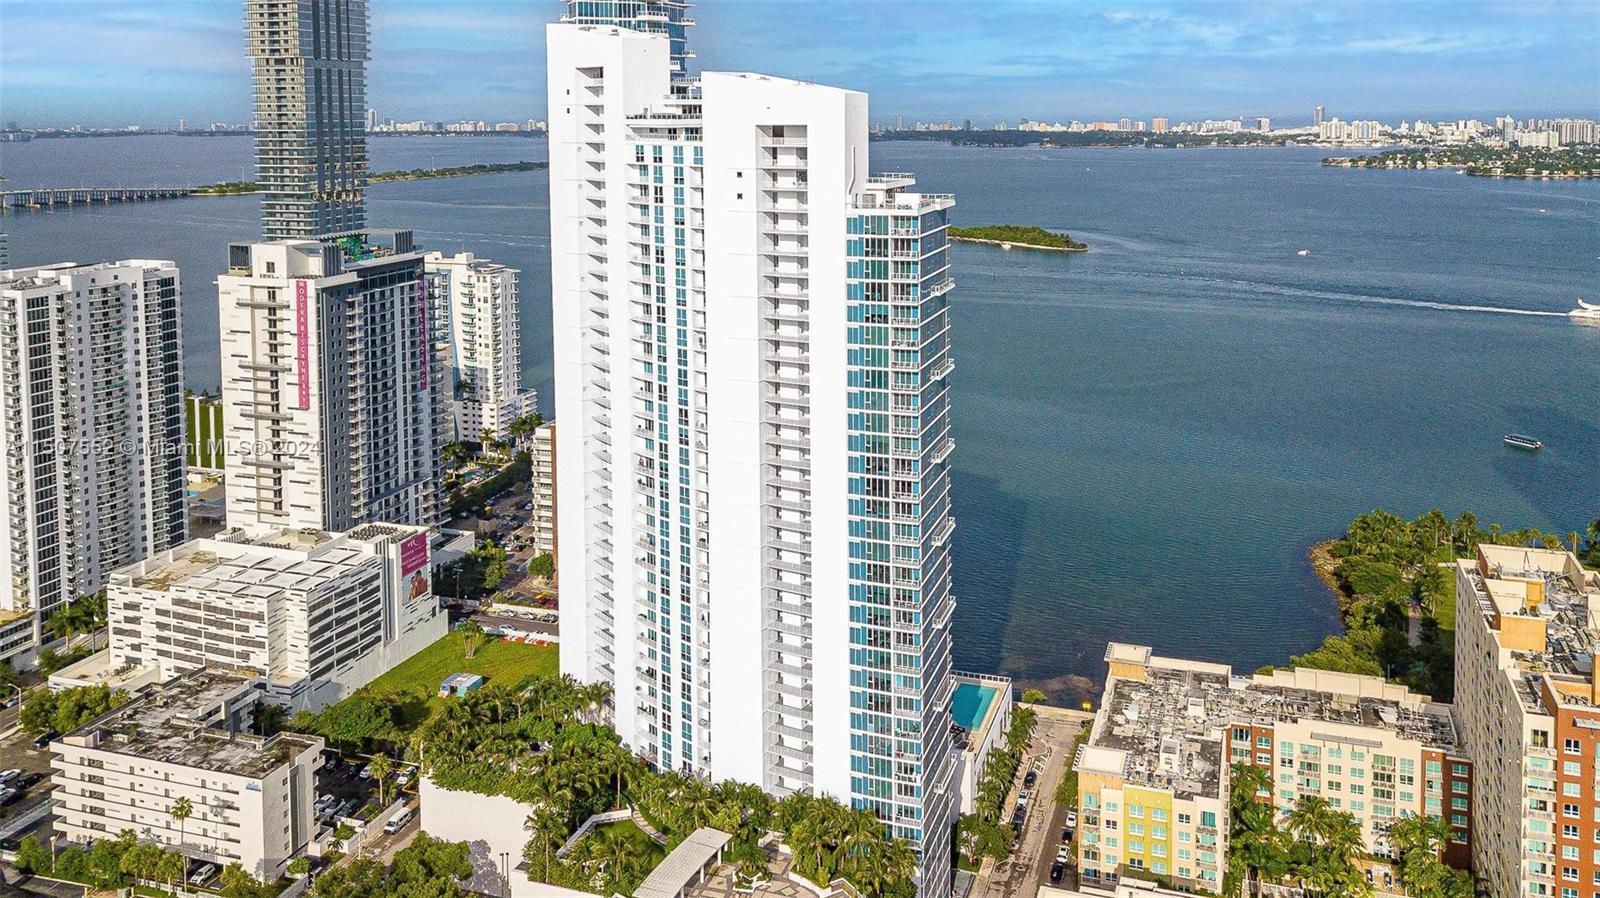 Experience waterfront luxury at Paramount Bay. This 2-bed, 2-bath residence offers spacious, modern 